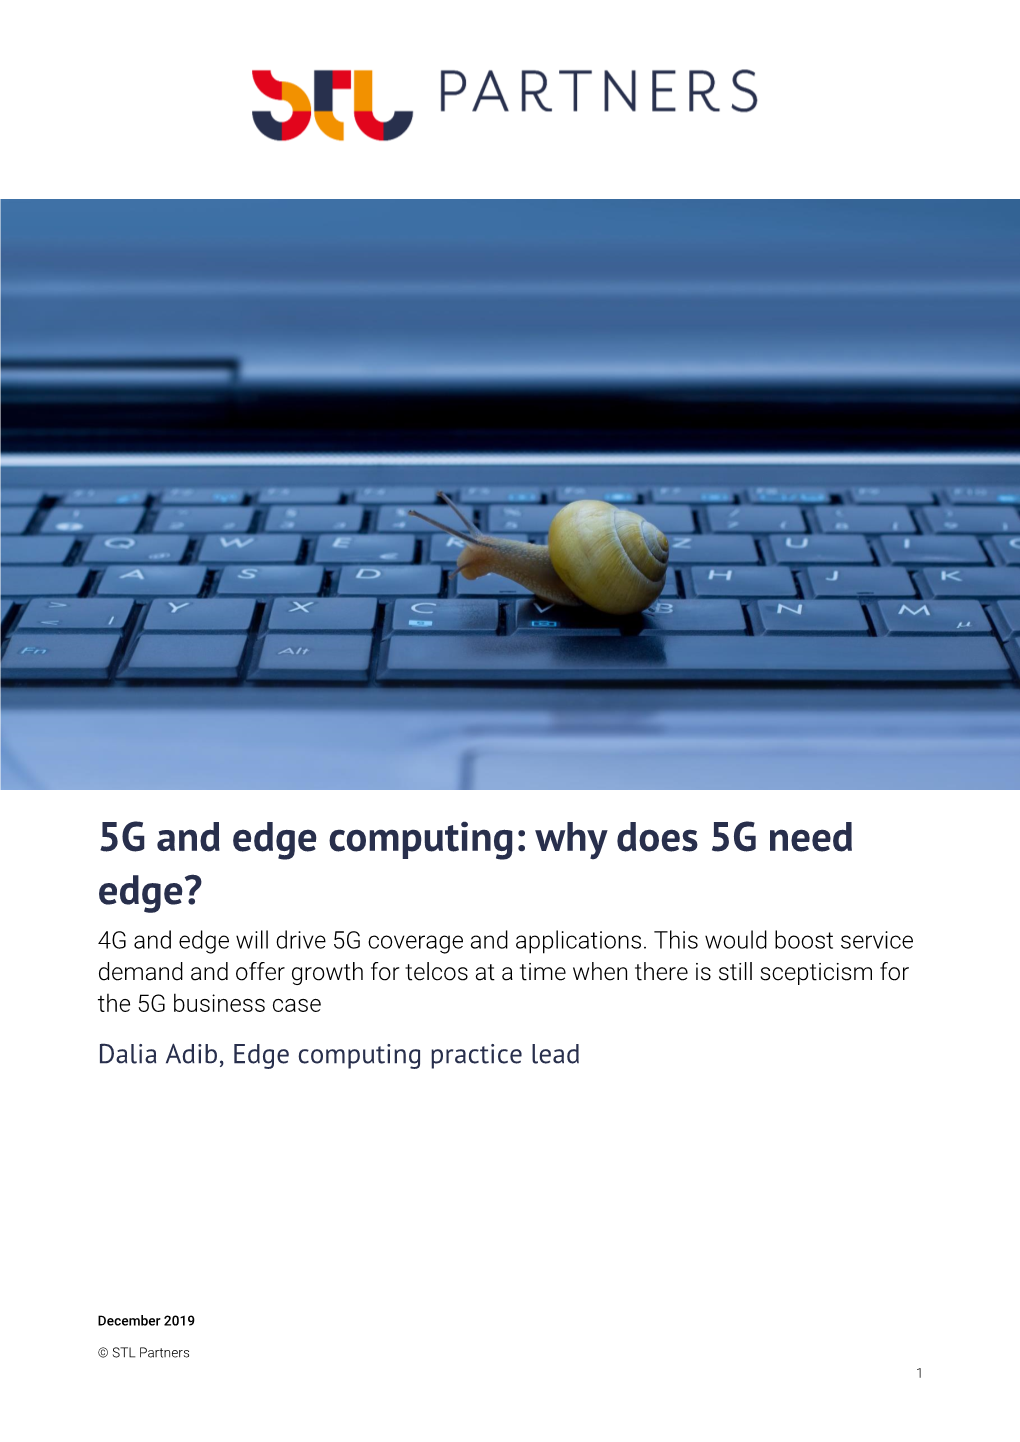 5G and Edge Computing: Why Does 5G Need Edge? 4G and Edge Will Drive 5G Coverage and Applications